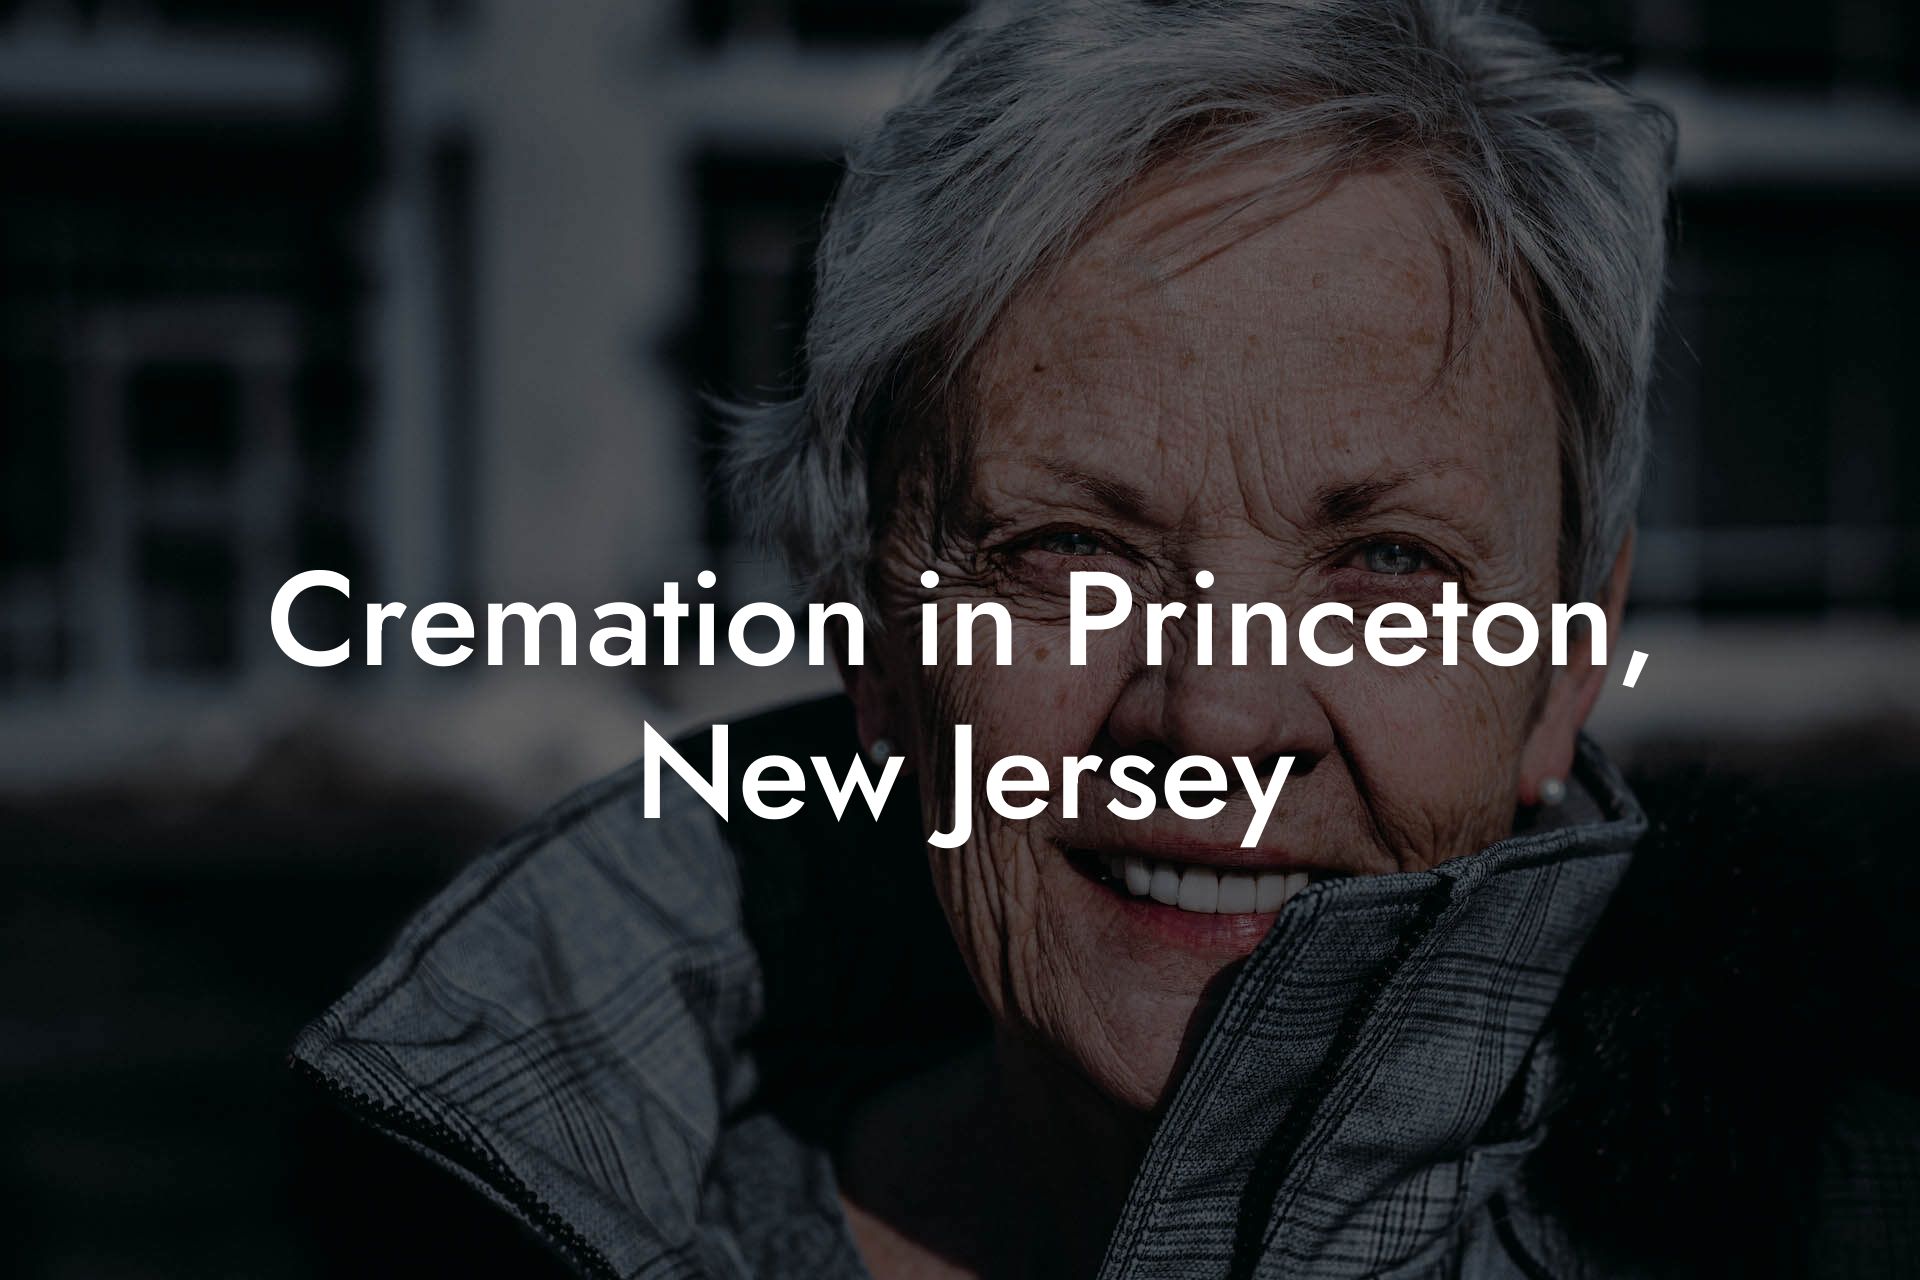 Cremation in Princeton, New Jersey